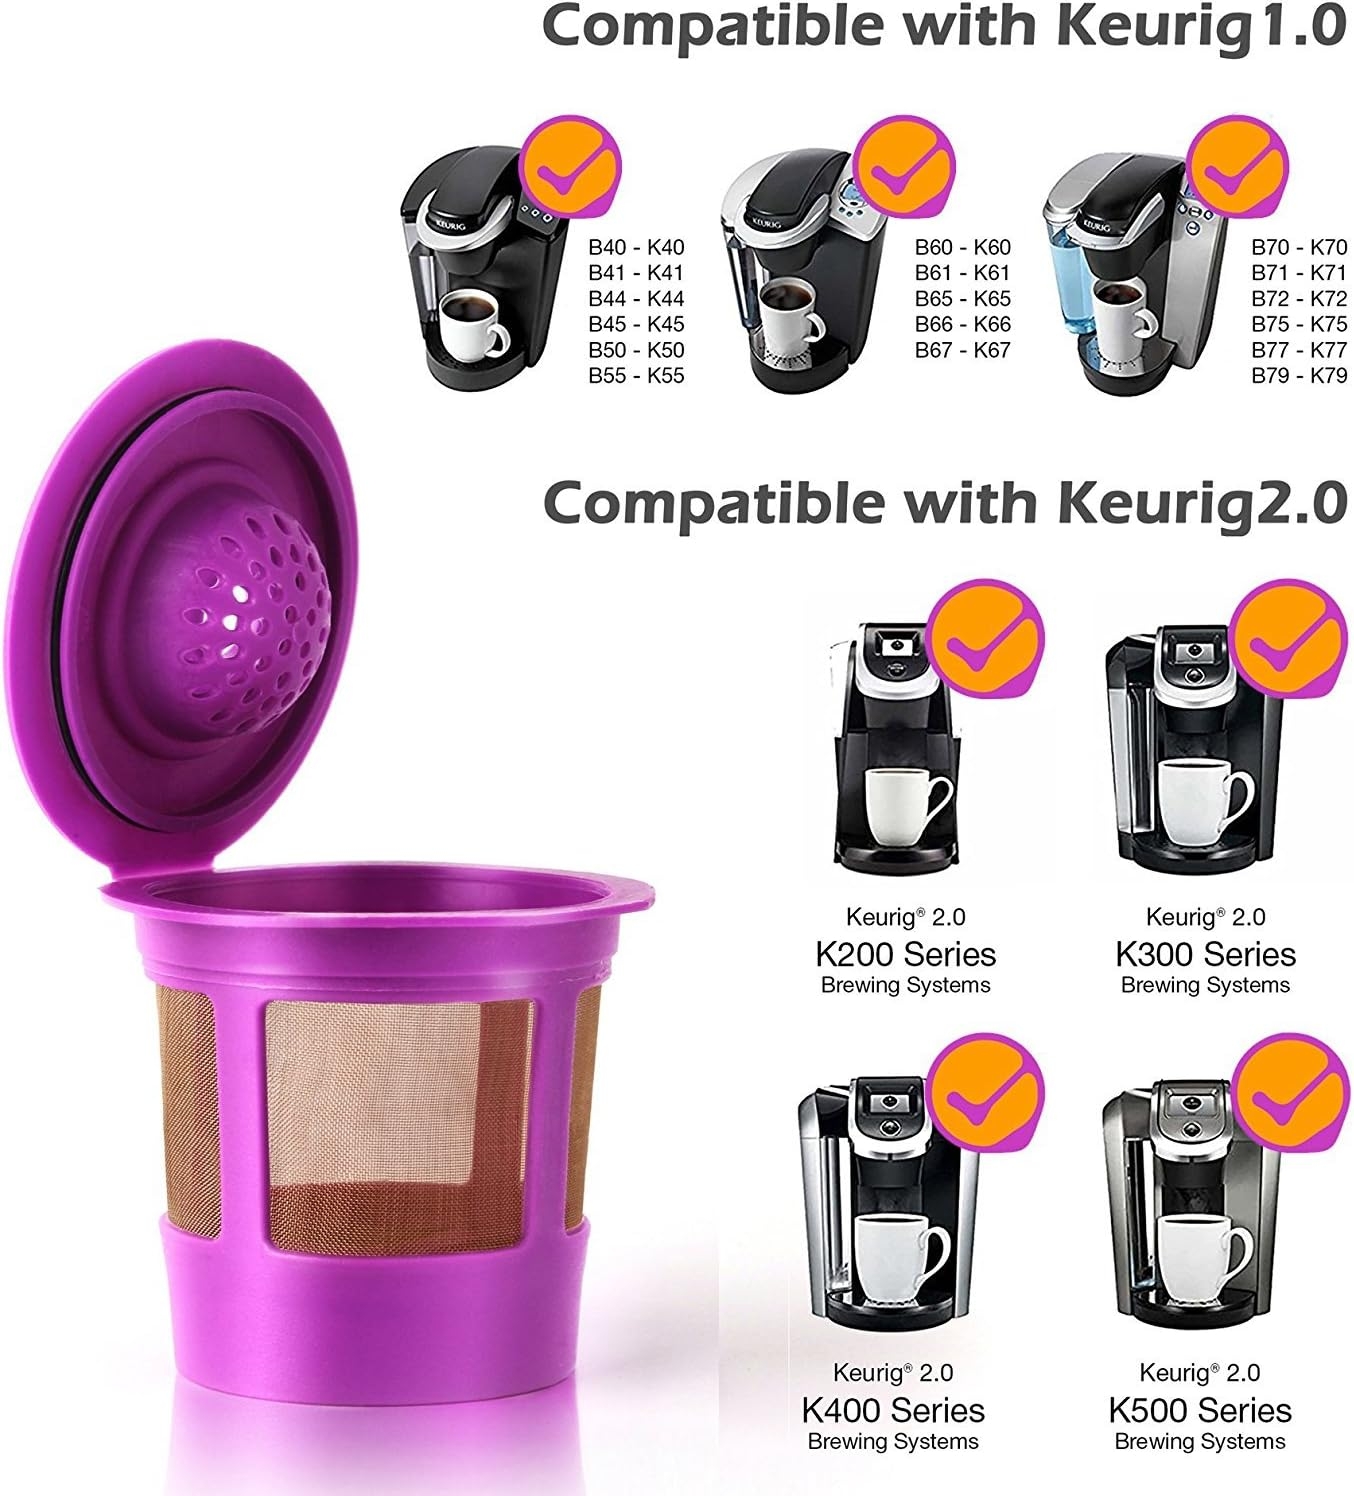 GoodCups 6 Reusable K Cups for Keurig K-Duo, K-Classic, K-Elite, K-Select, K-Cafe, K-Compact, K200, K300, K400, K500, Refillable Kcups Coffee Filters for 2.0 and 1.0 Brewers